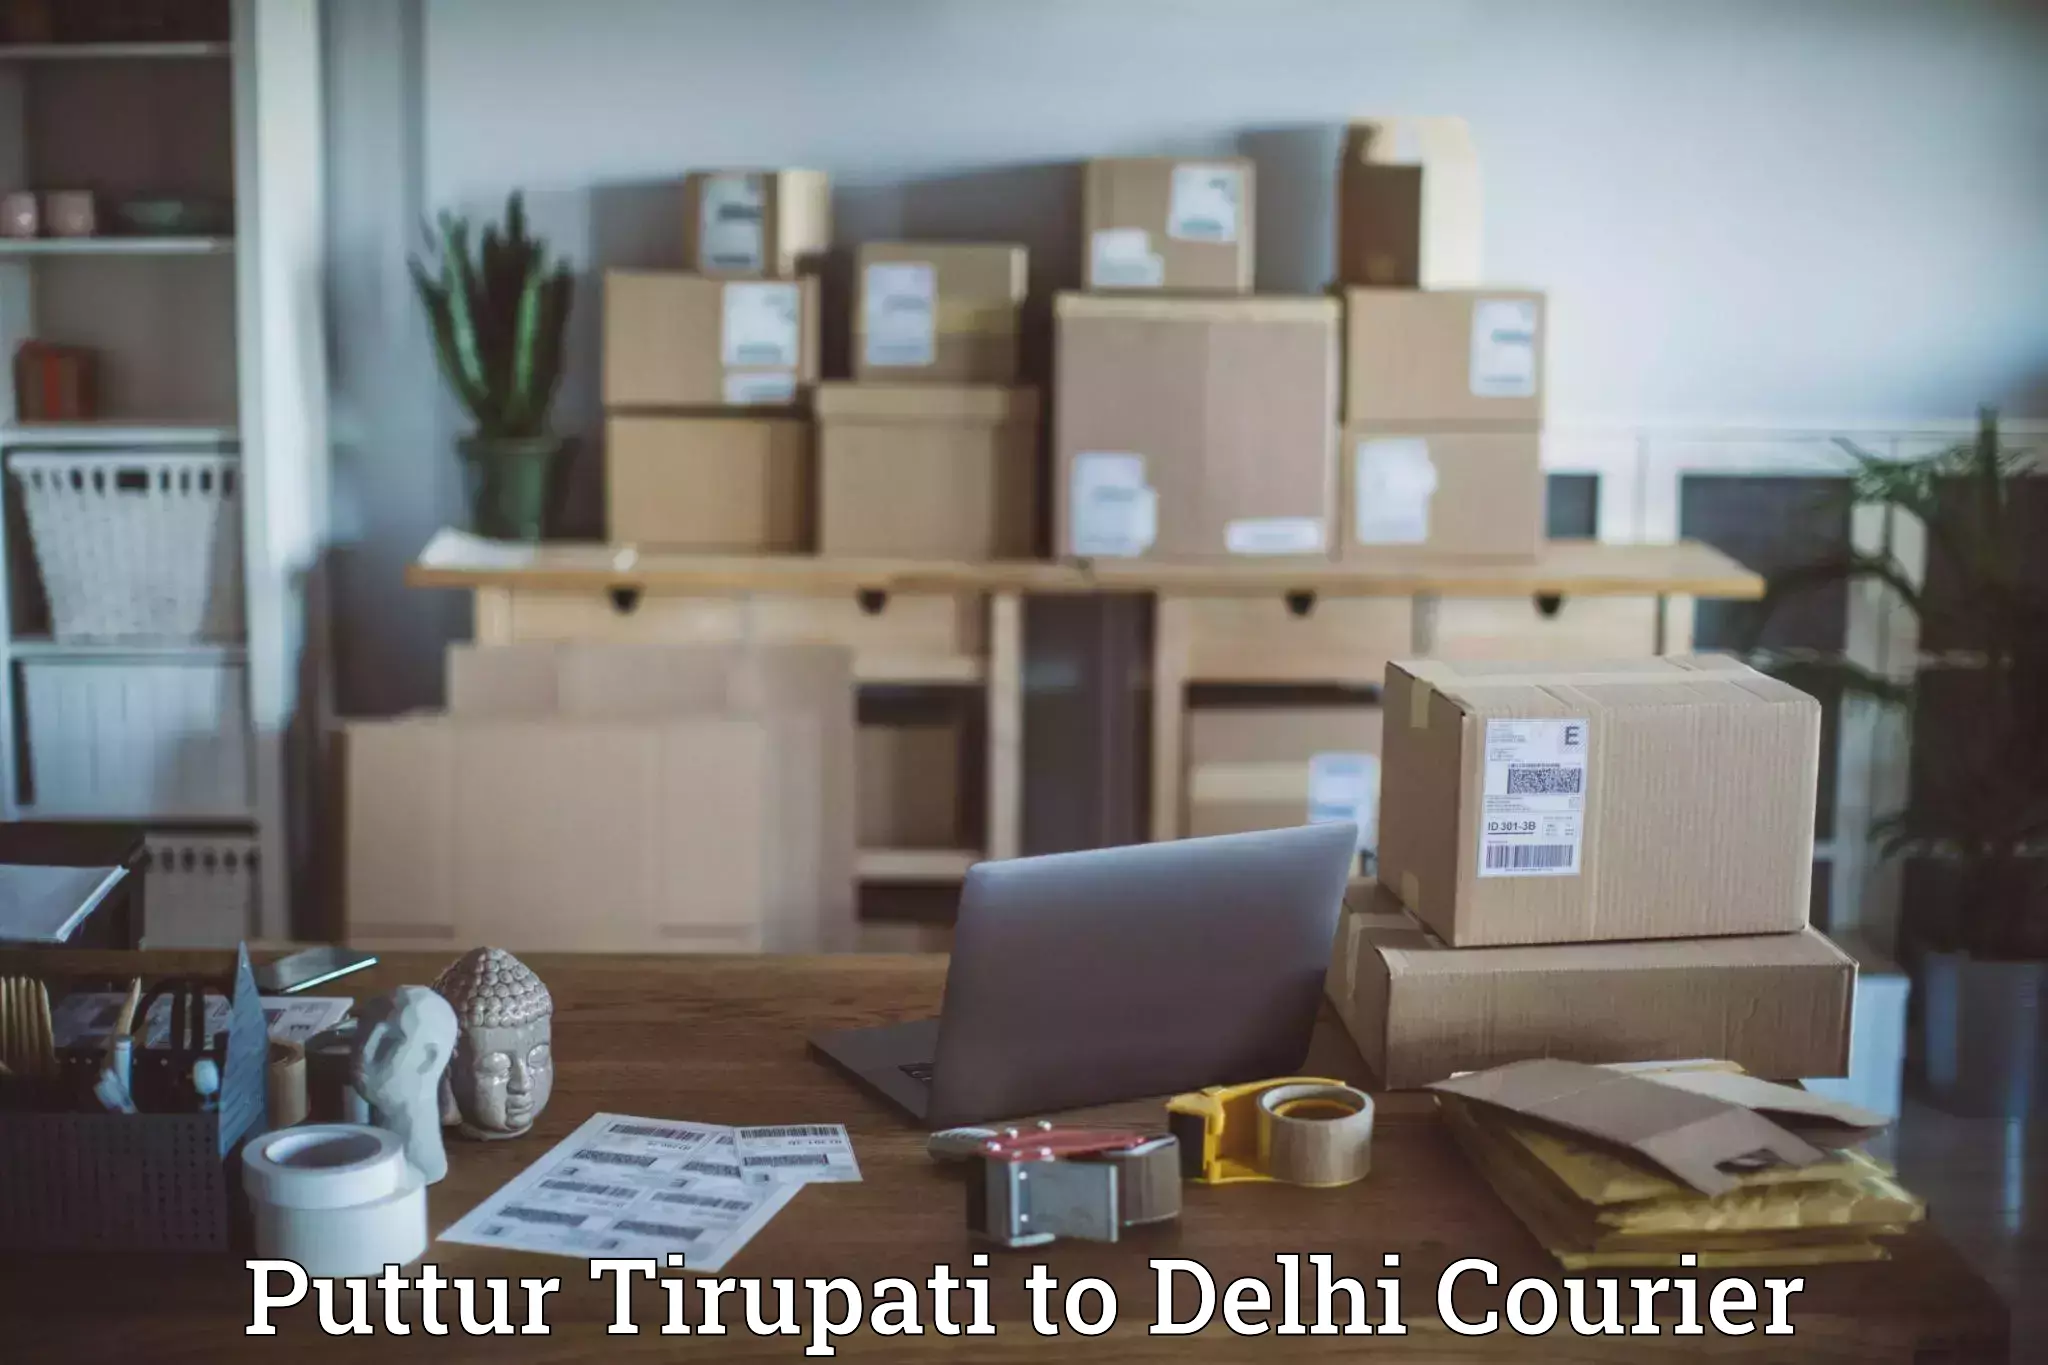 Cost-effective courier options Puttur Tirupati to NCR